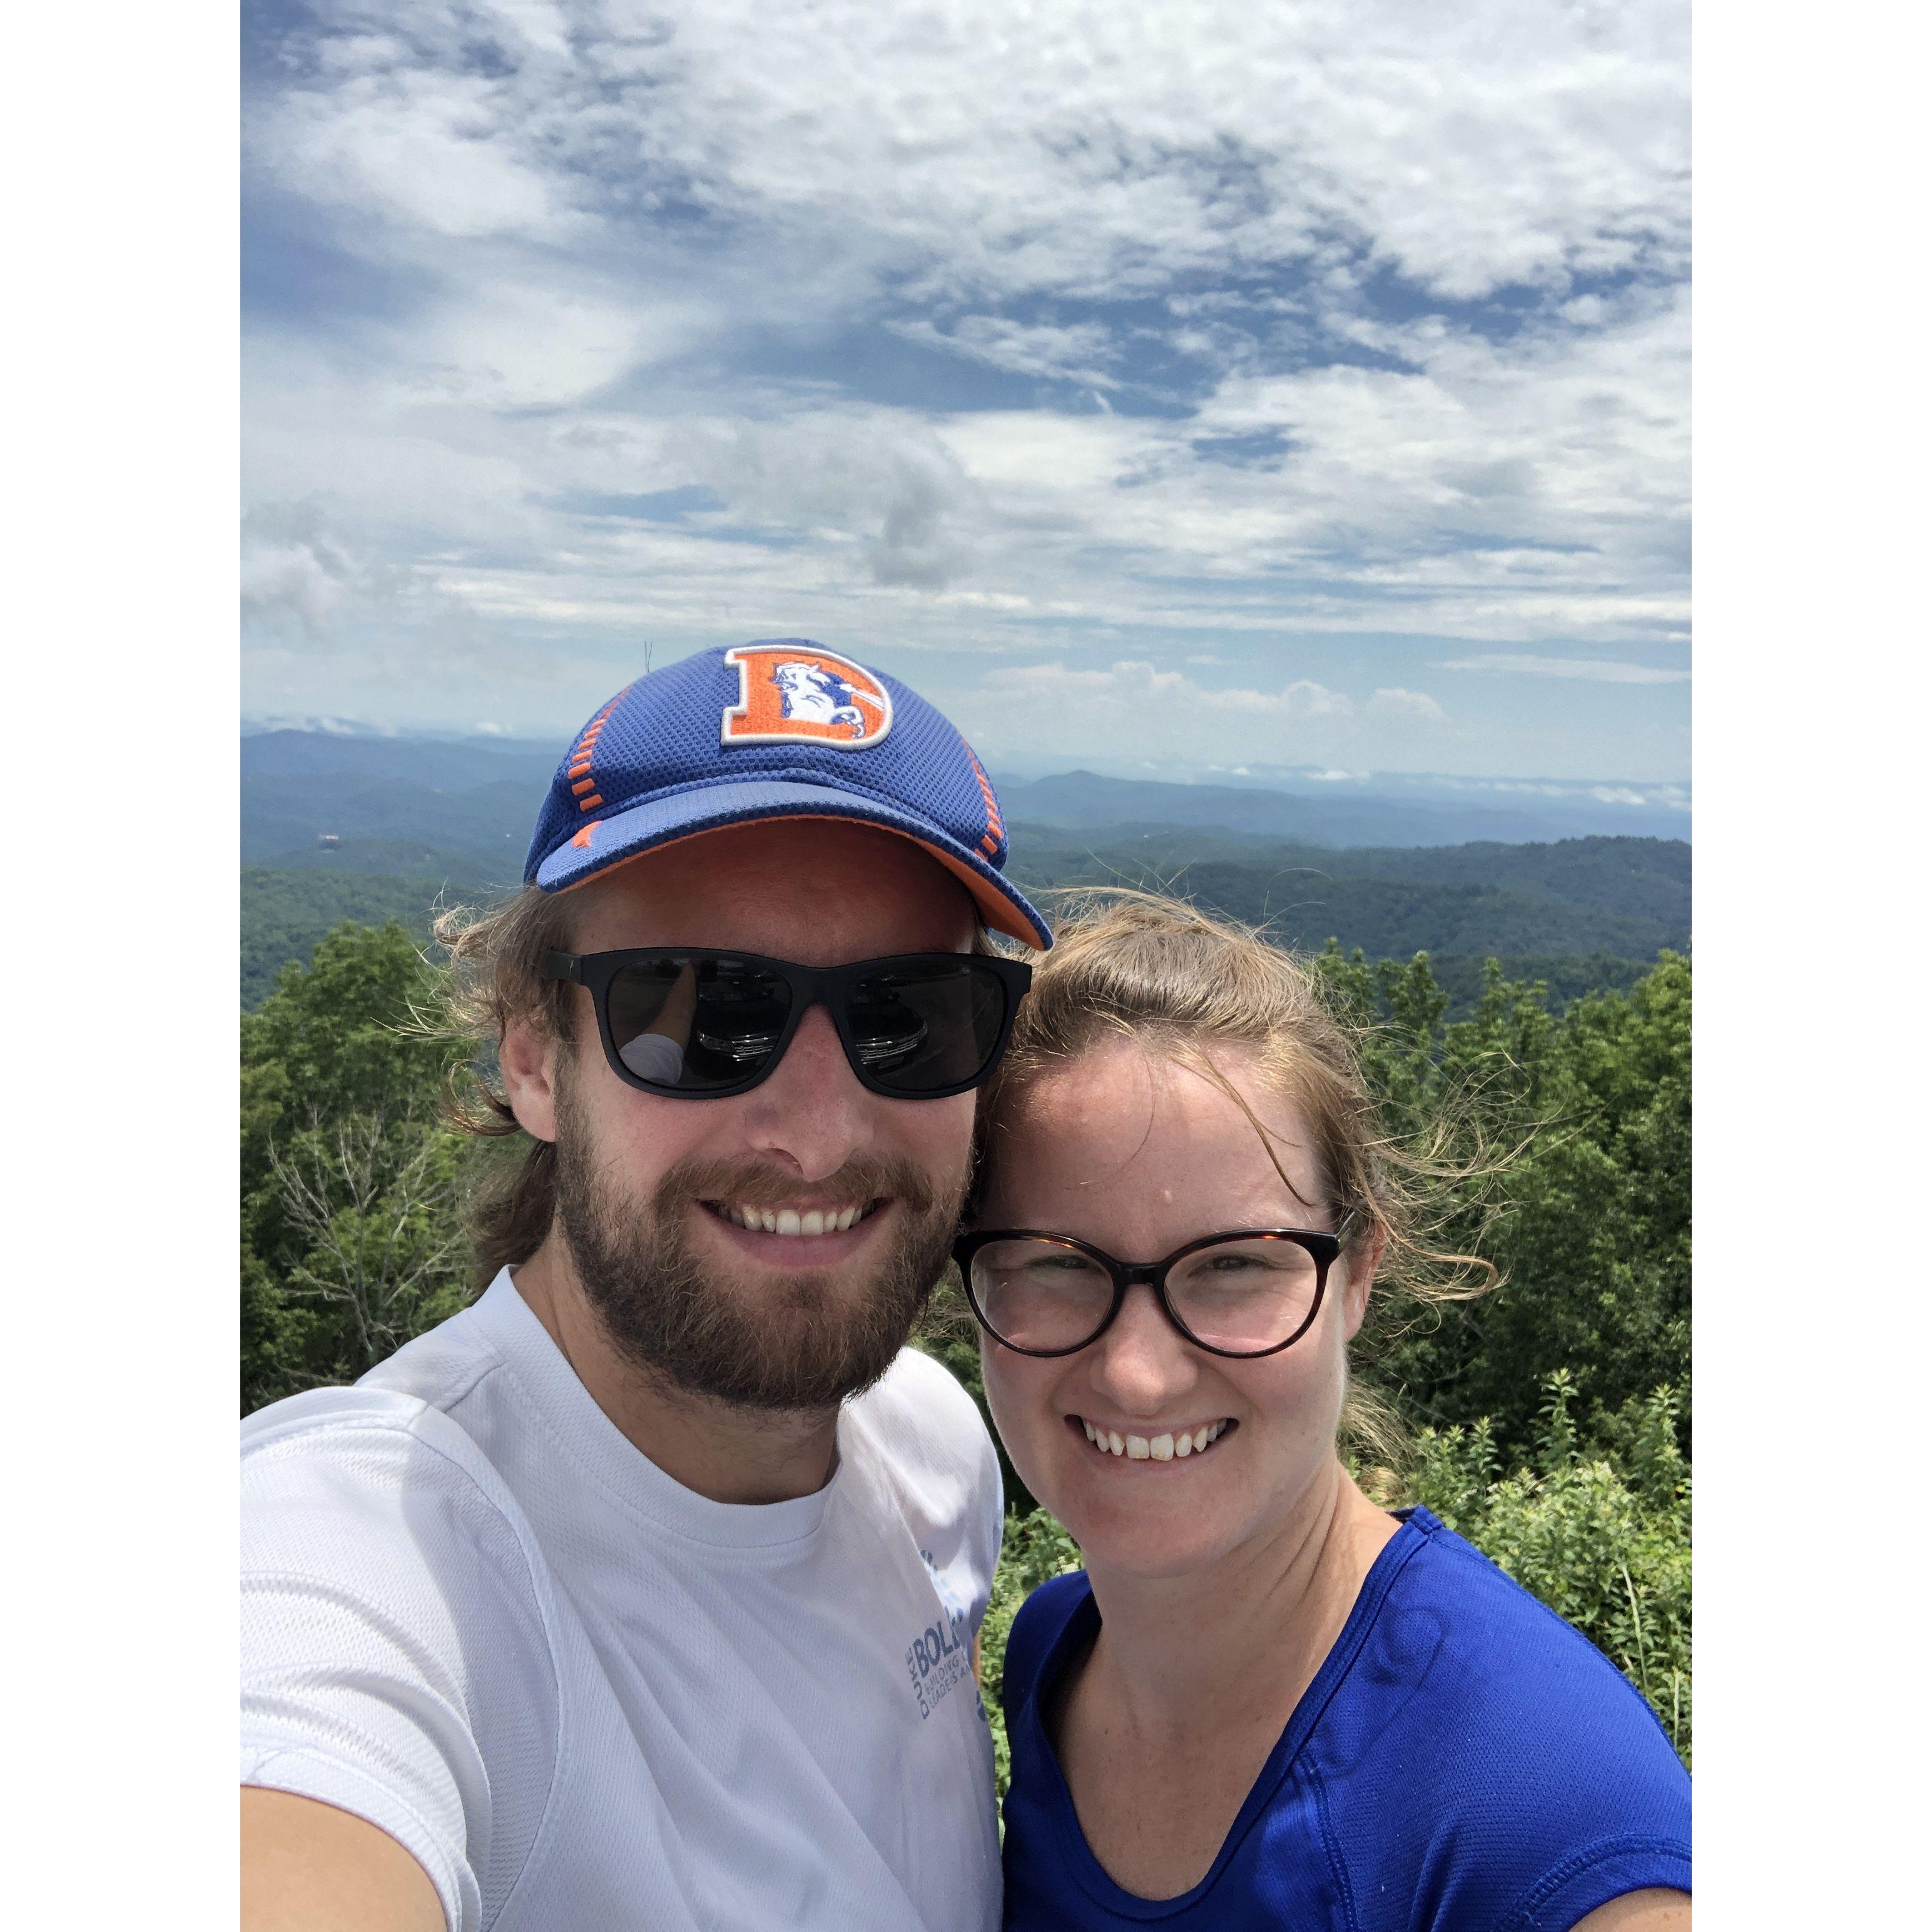 Blue Ridge Parkway, North Carolina - one of our last weeks in NC after 7 years!